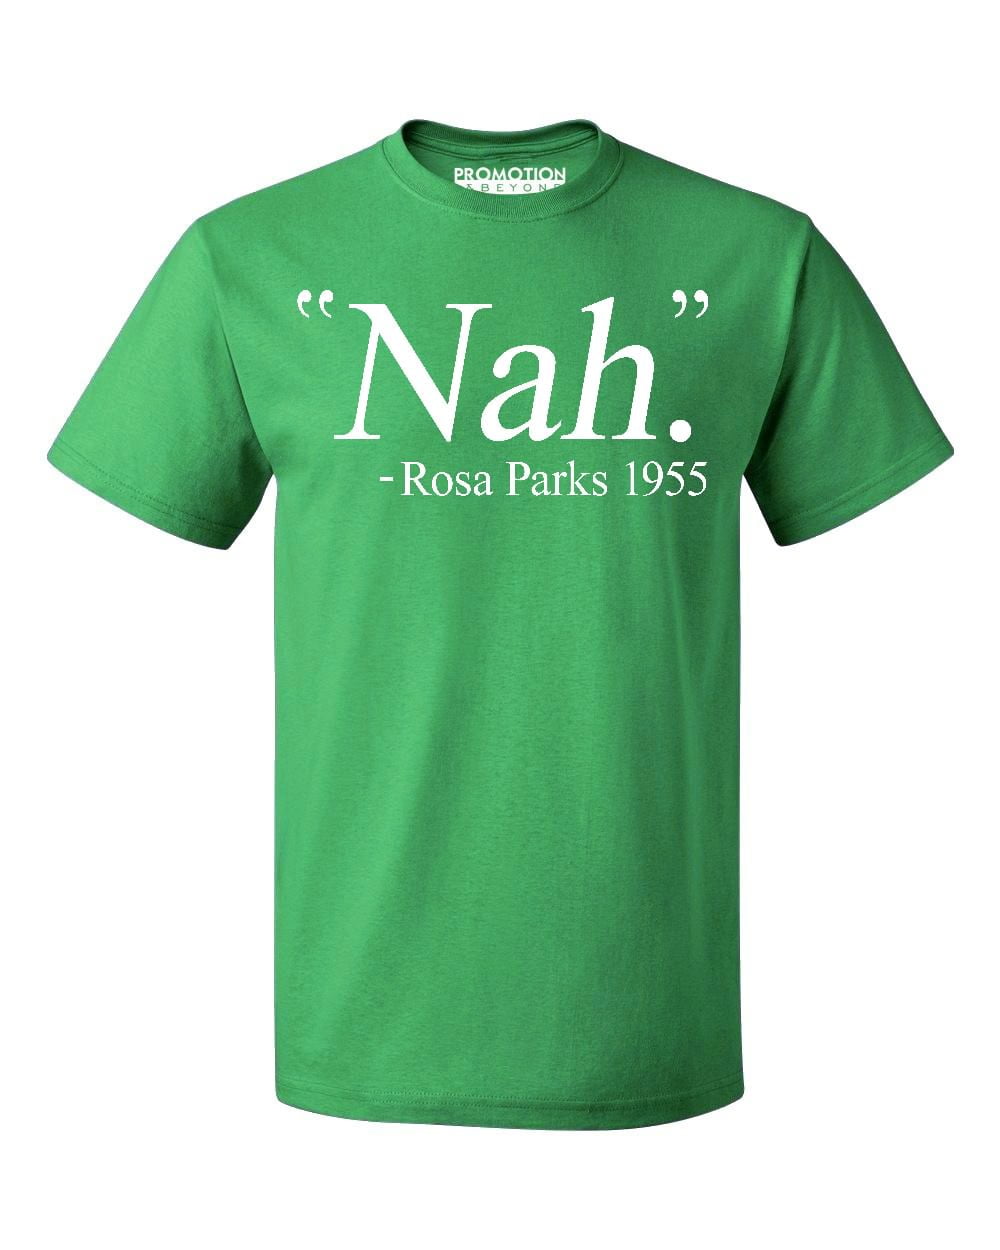 Nah. Rosa Parks 1955 Civil Rights Quote Men's T-shirt, S, Green